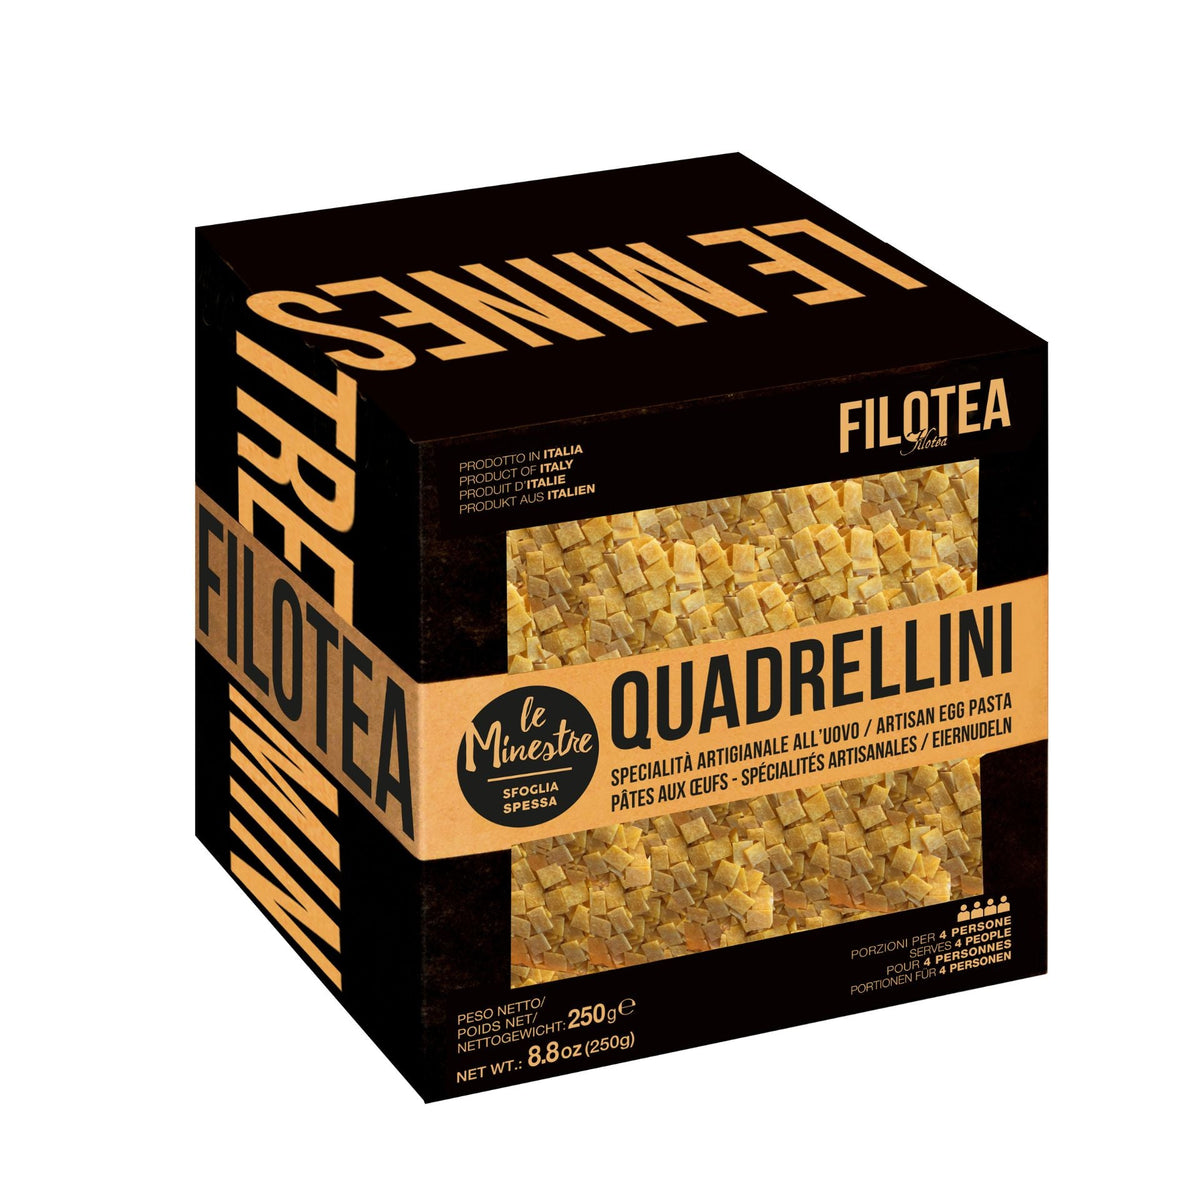 Filotea Quadrellini Tiny Egg Pasta 250g  | Imported and distributed in the UK by Just Gourmet Foods